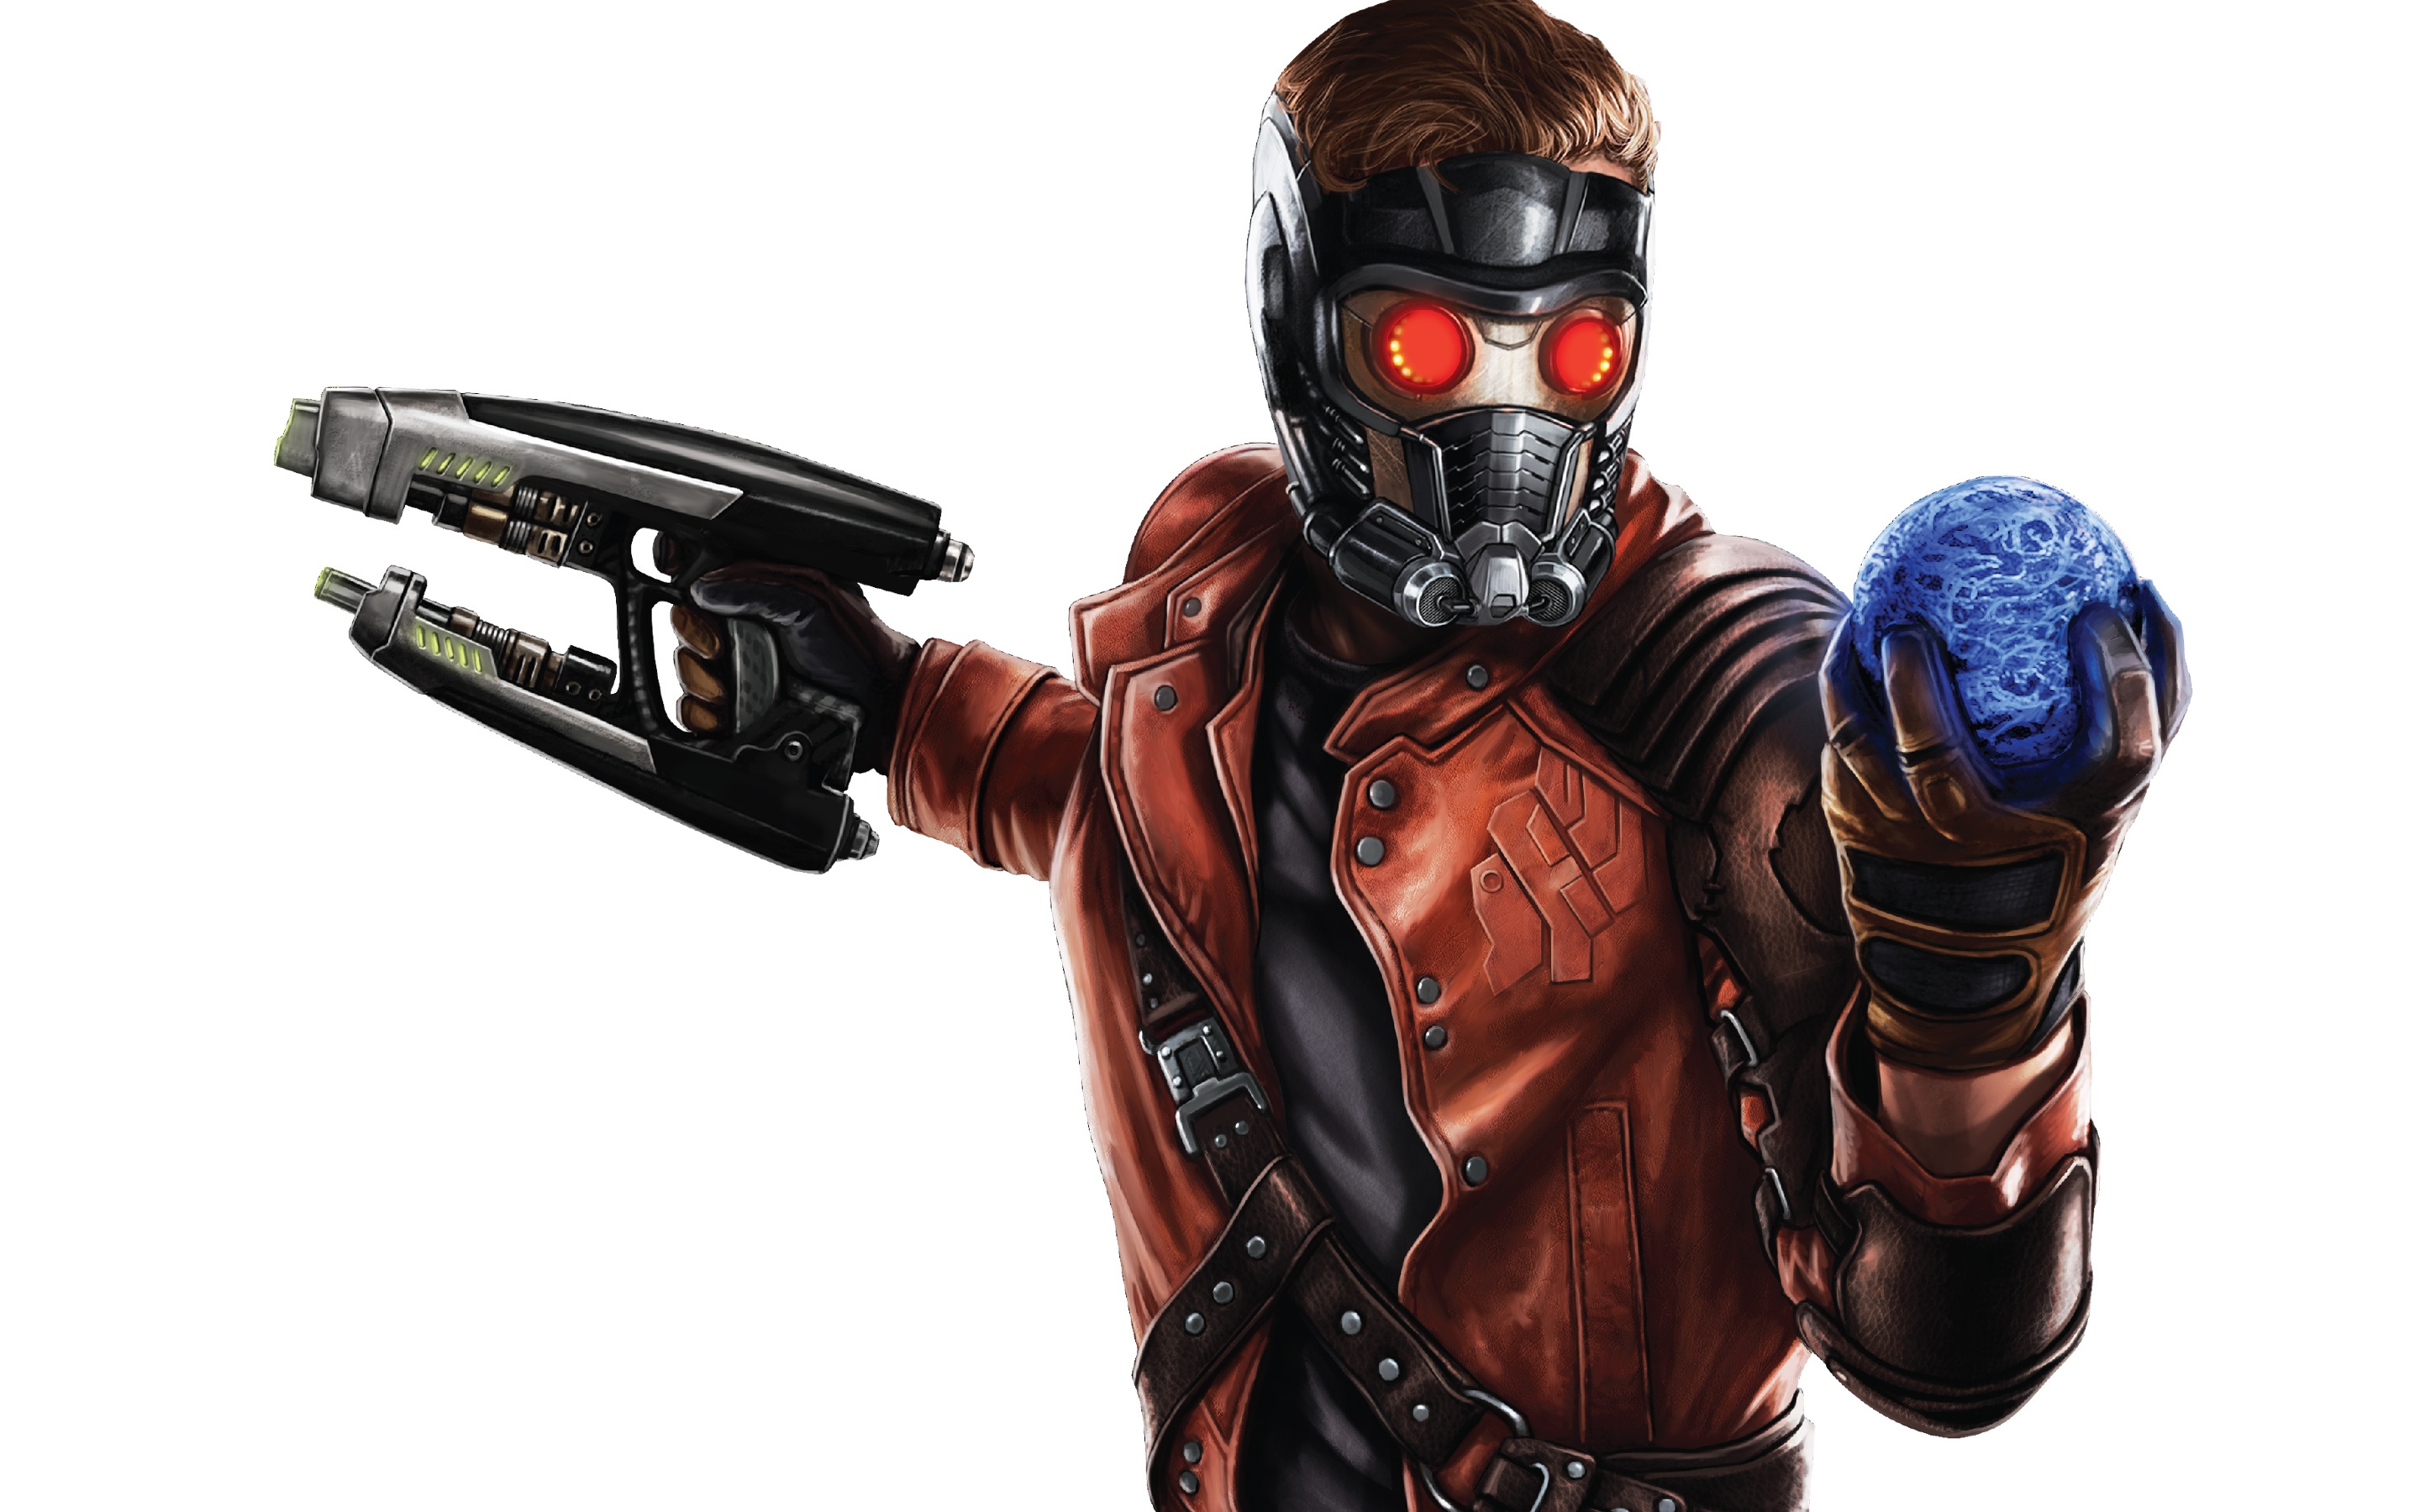 Download Original - Rocket Raccoon And Star Lord , HD Wallpaper & Backgrounds